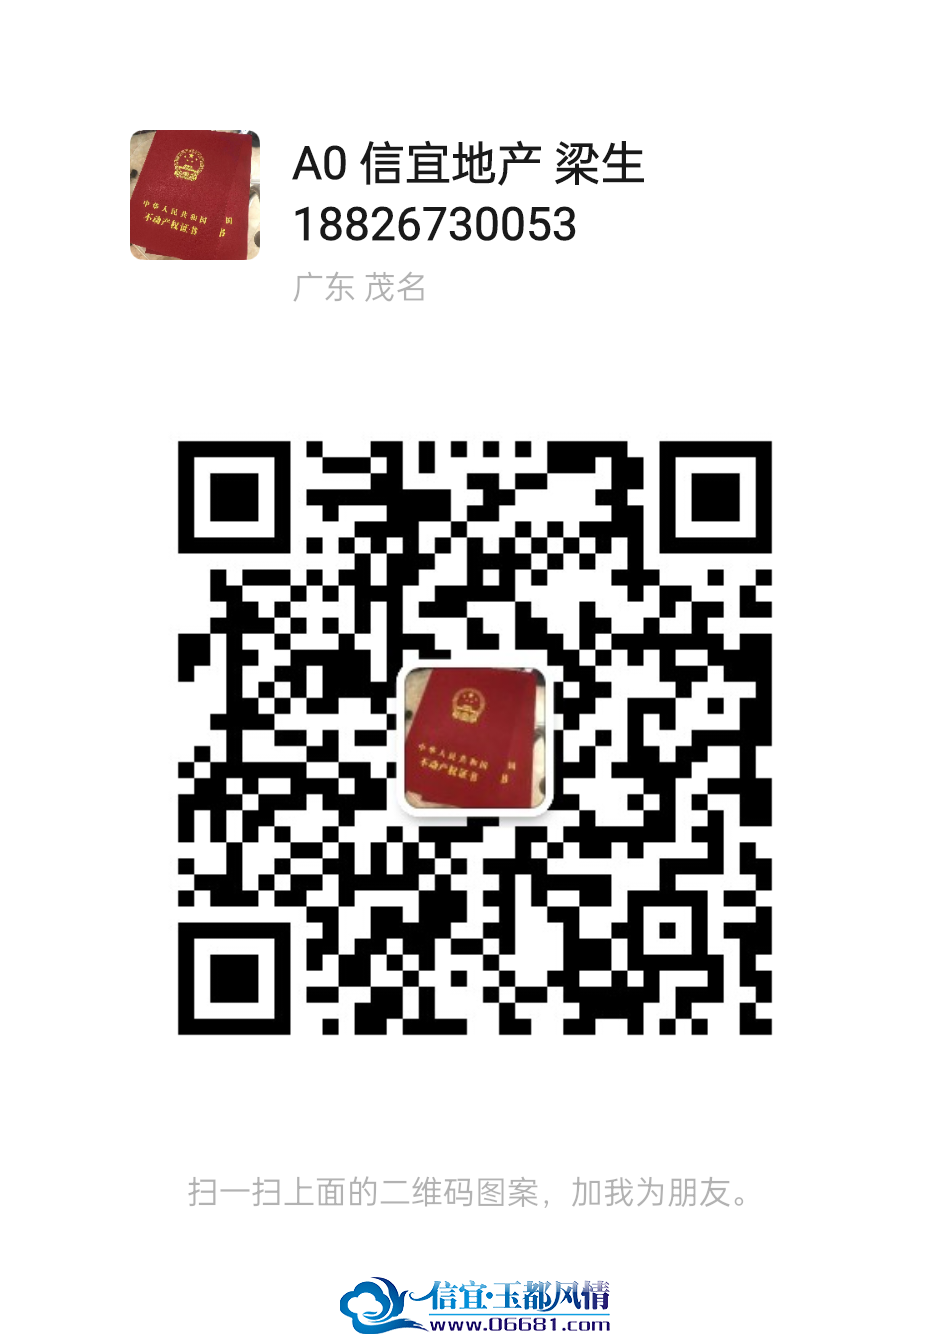 mmqrcode1705536975089.png